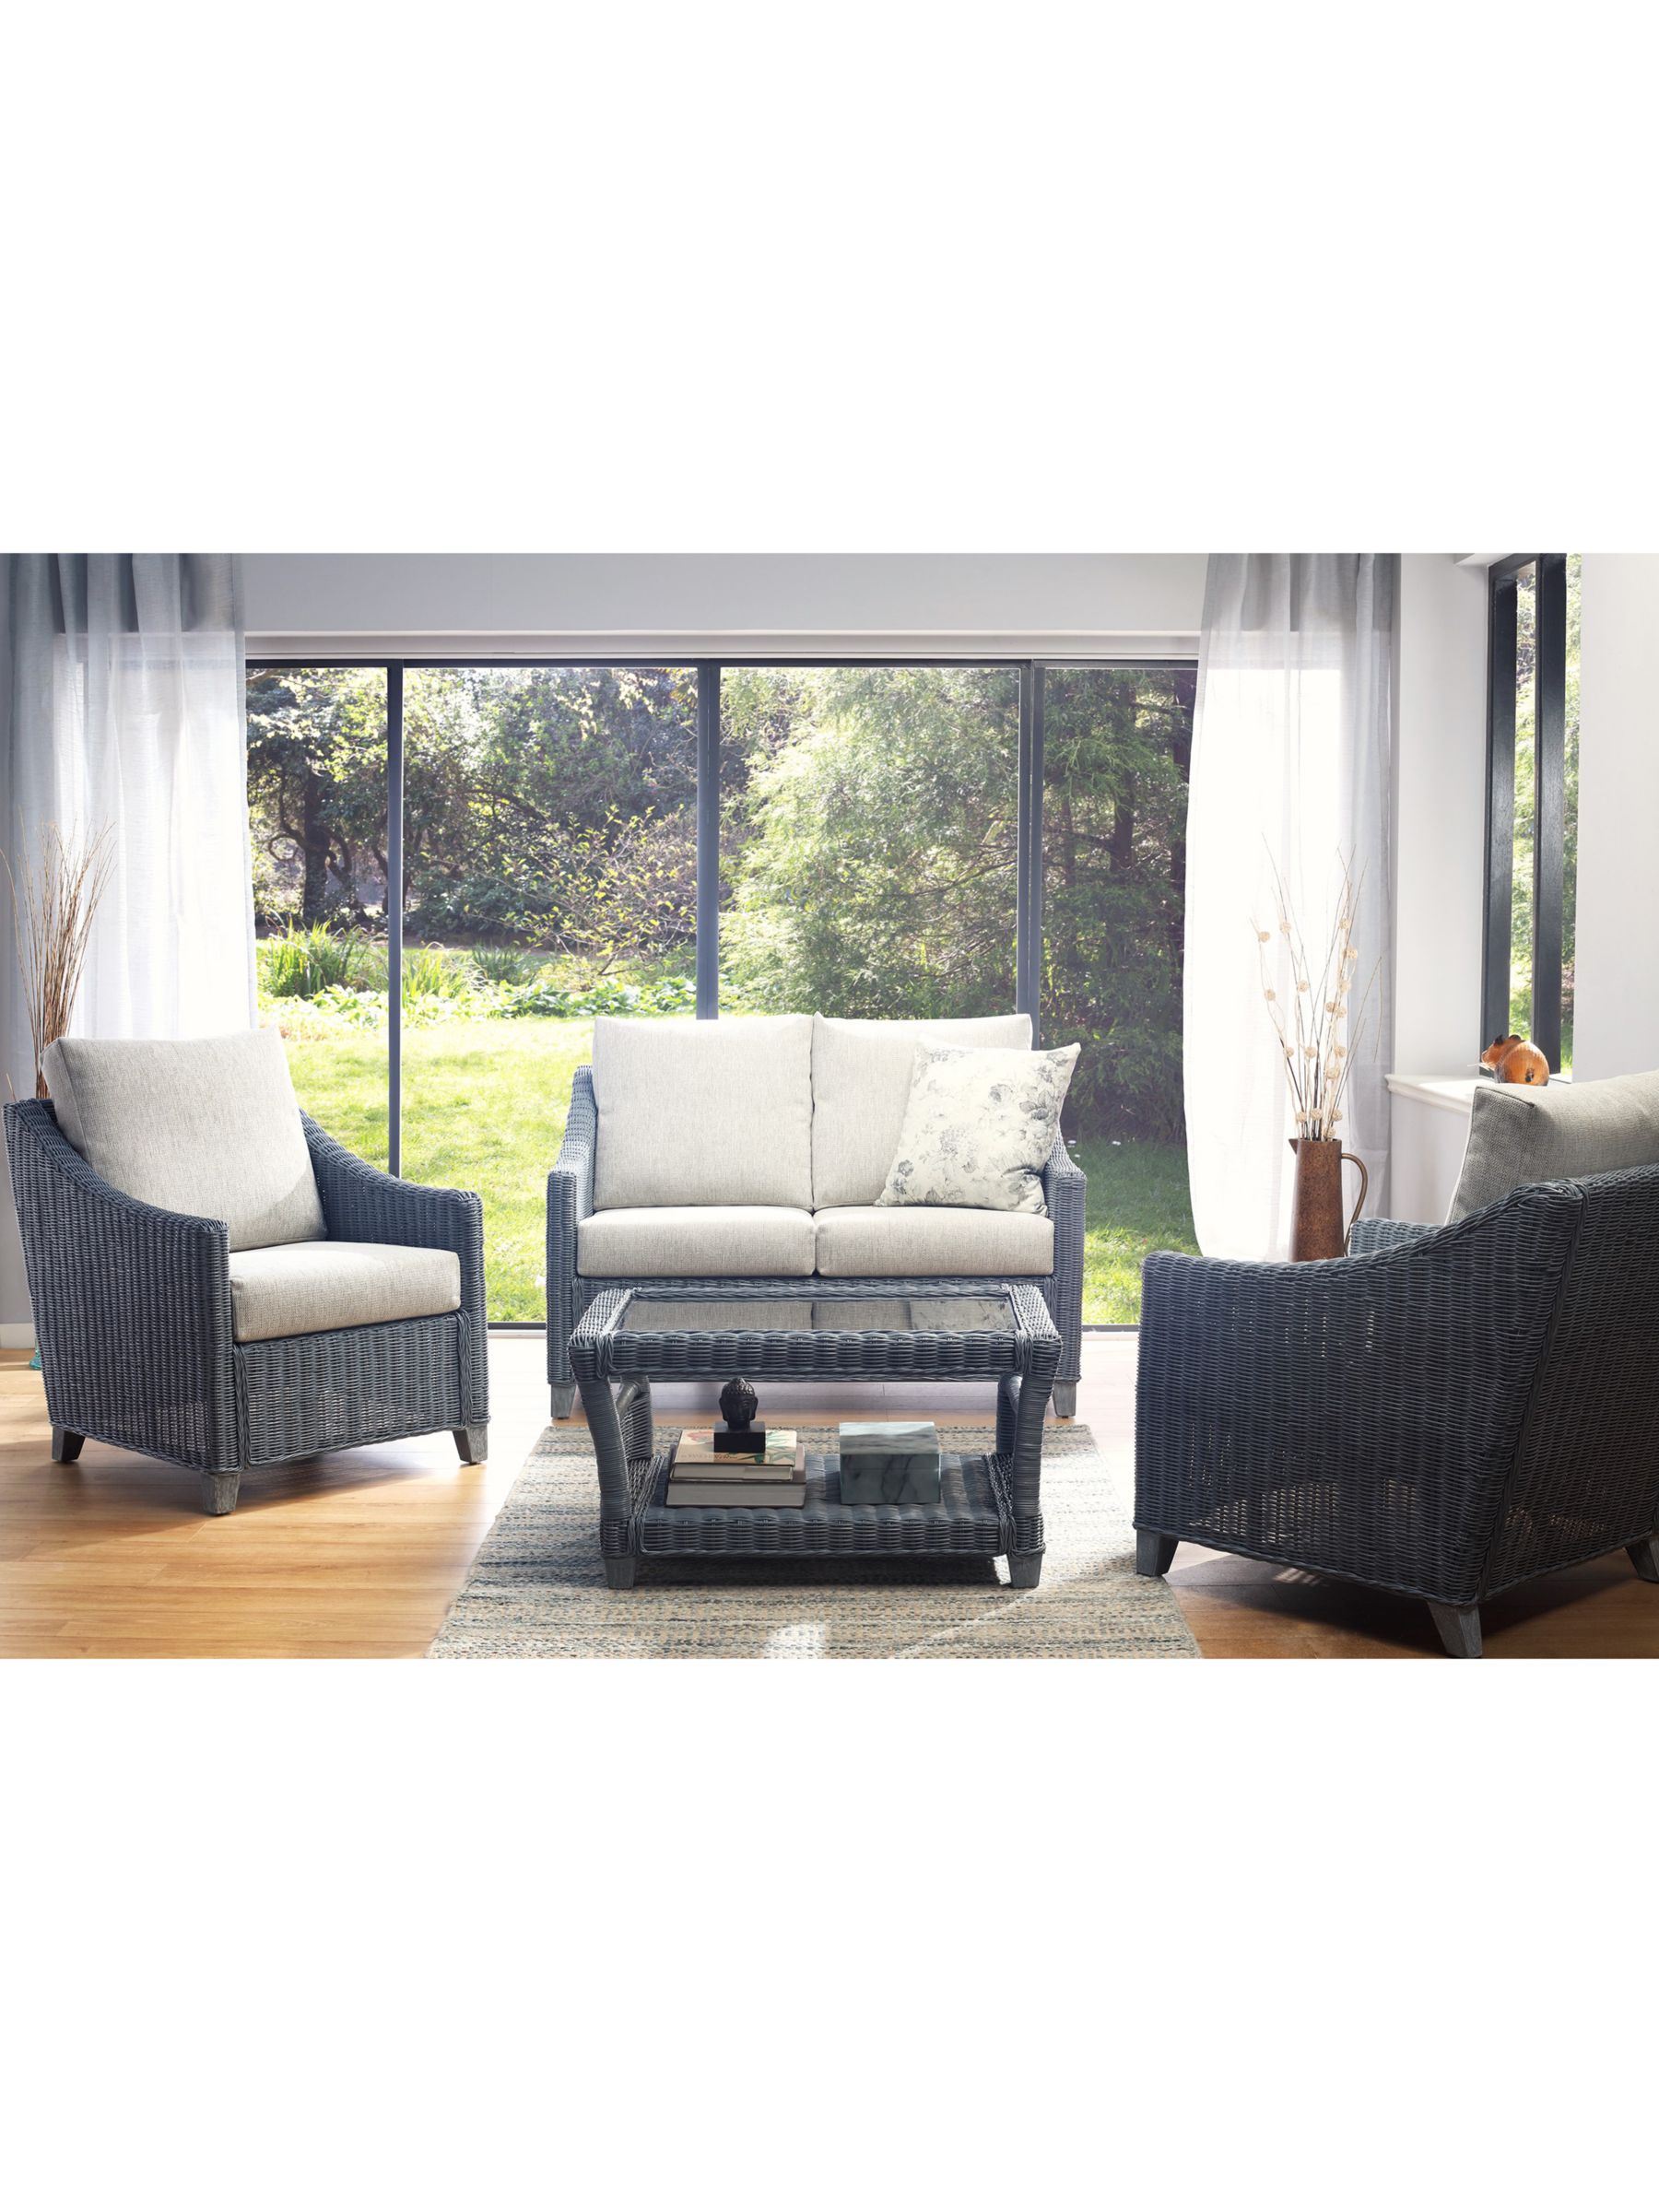 Photo of Desser dijon rattan 4-seater lounging table & chairs set grey